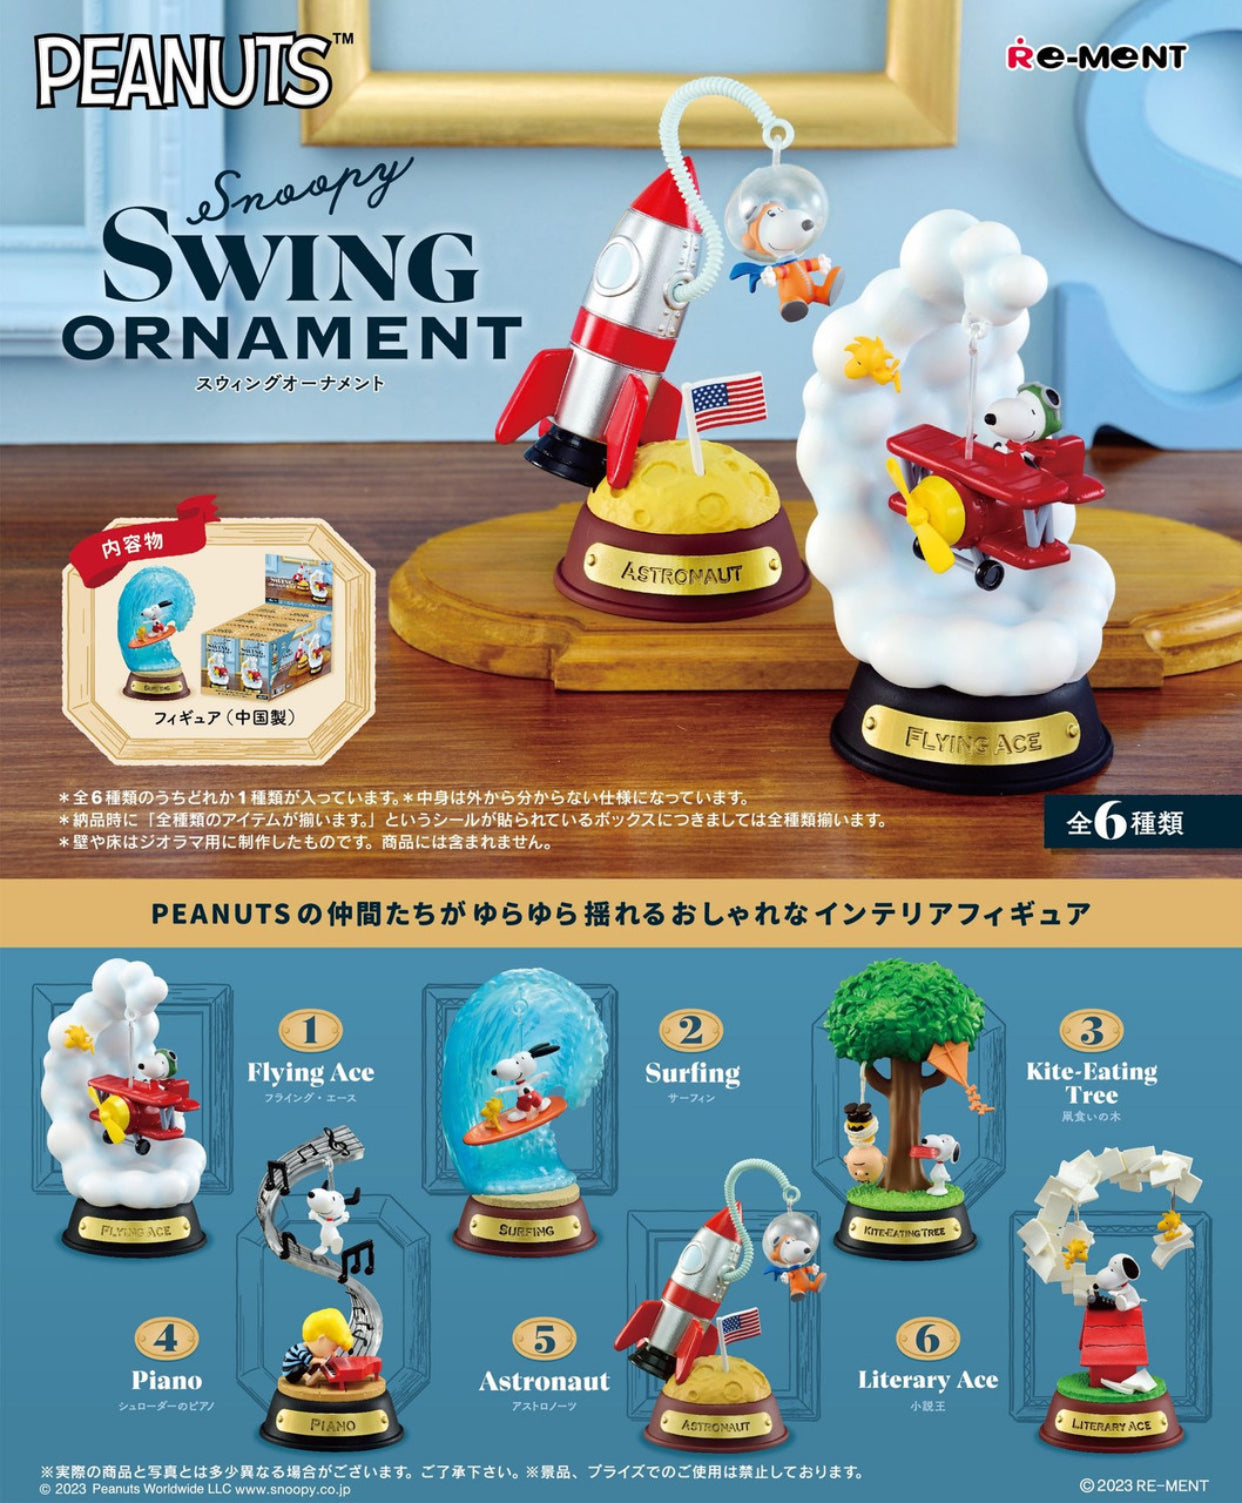 Re-ment Peanuts Snoopy SWING ORNAMENT